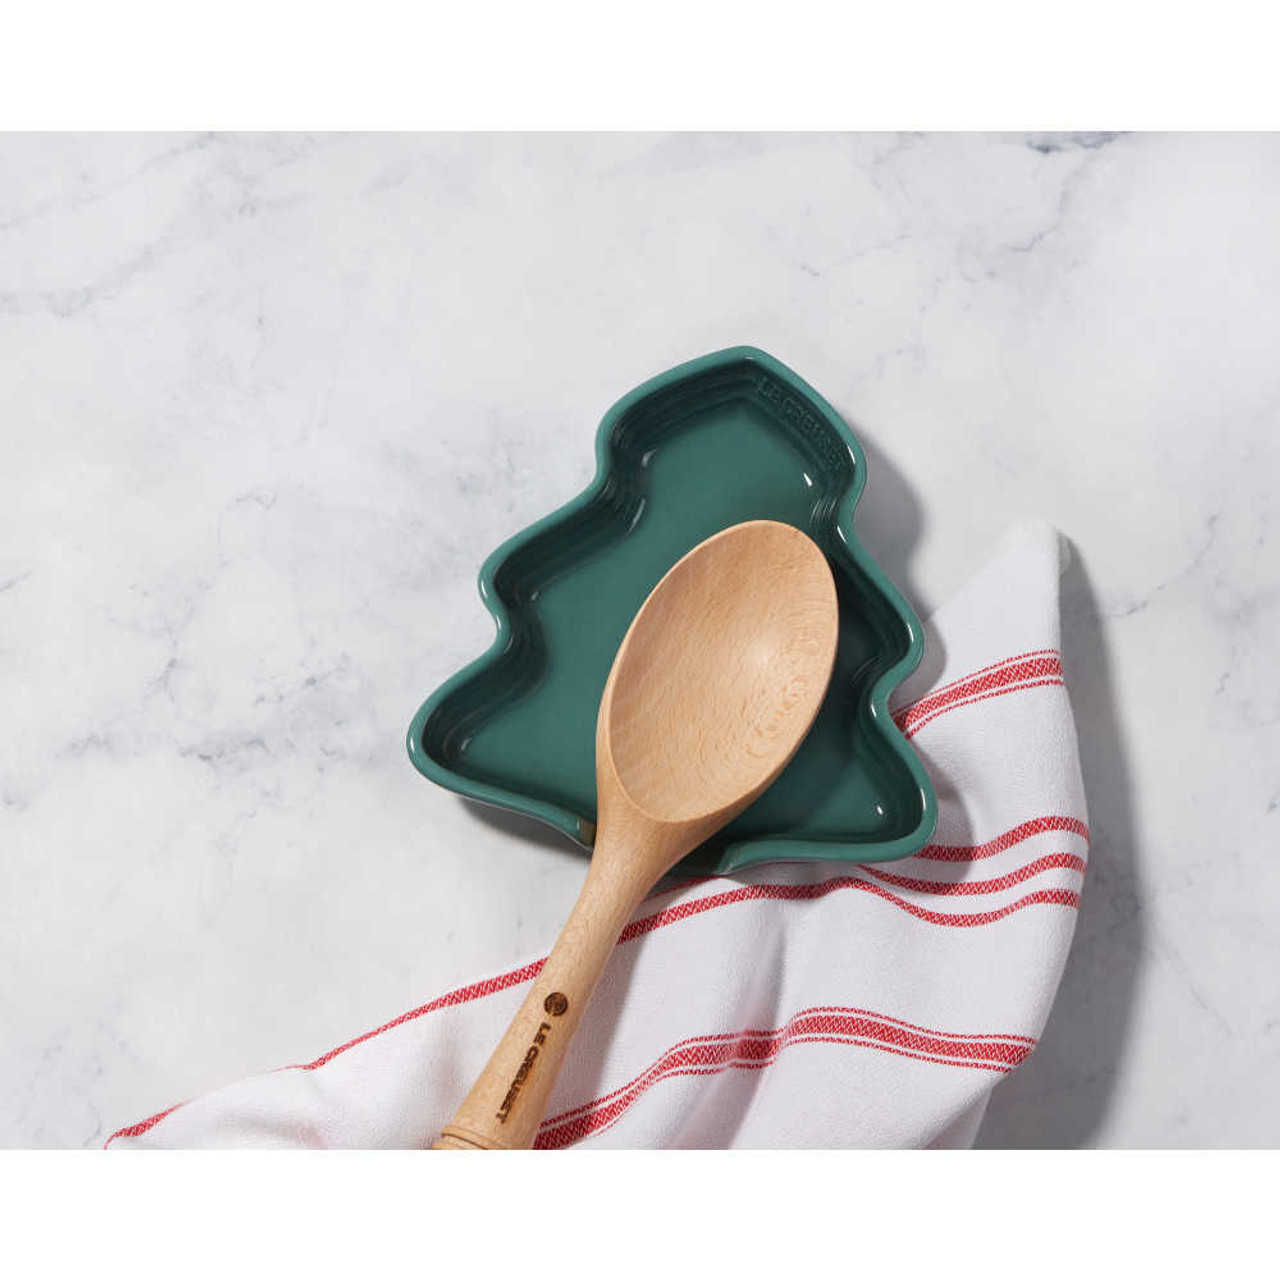 https://cdn11.bigcommerce.com/s-hccytny0od/images/stencil/1280x1280/products/5005/21263/Le_Creuset_Noel_Collection_Tree_Spoon_Rest__27477.1663973262.jpg?c=2?imbypass=on